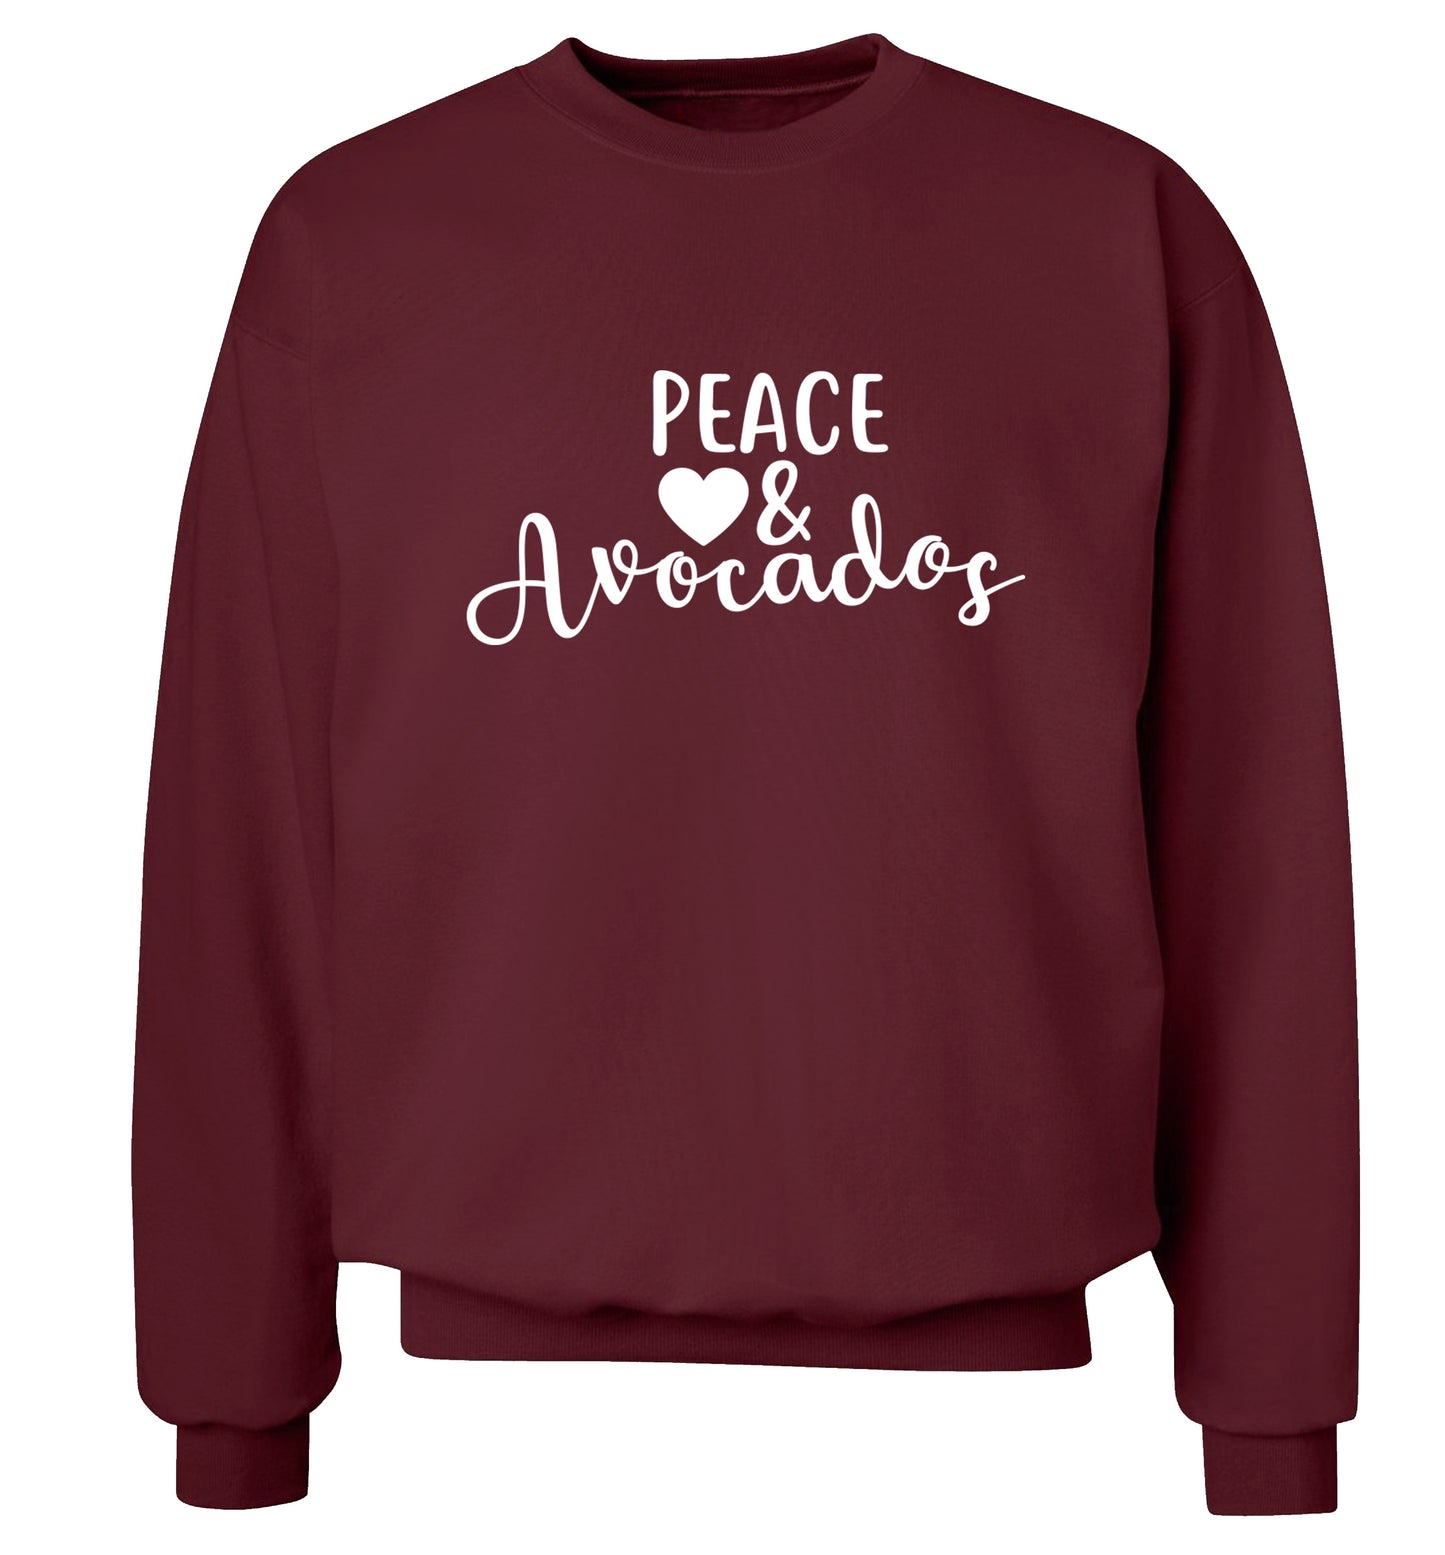 Peace love and avocados Adult's unisex maroon Sweater 2XL